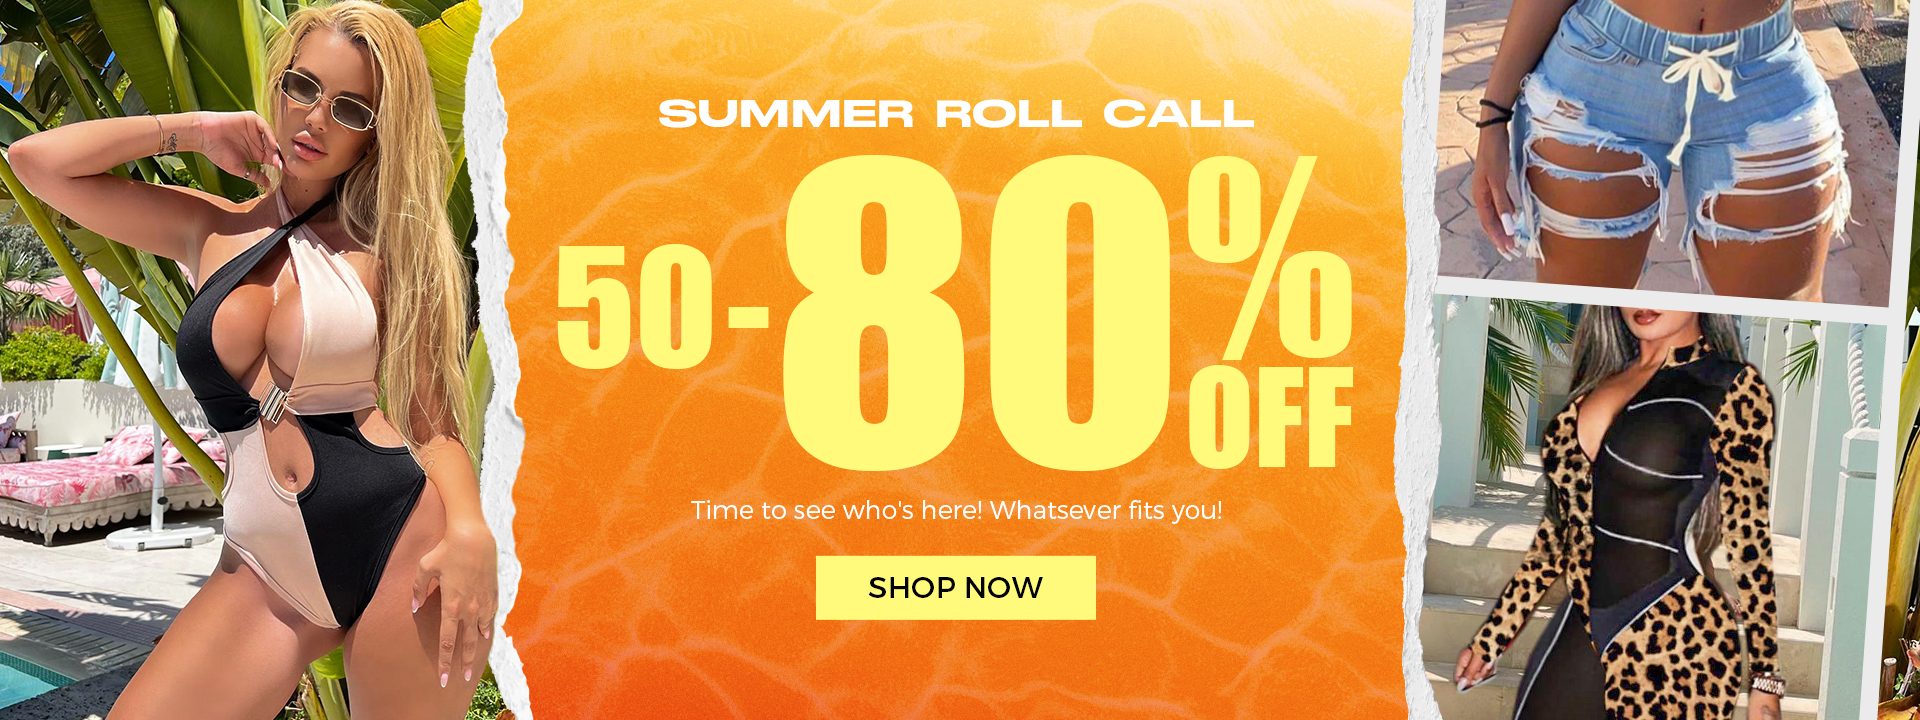 Lovleywholesale Summer Clearance from $1.99 - All is 50%-80% off!